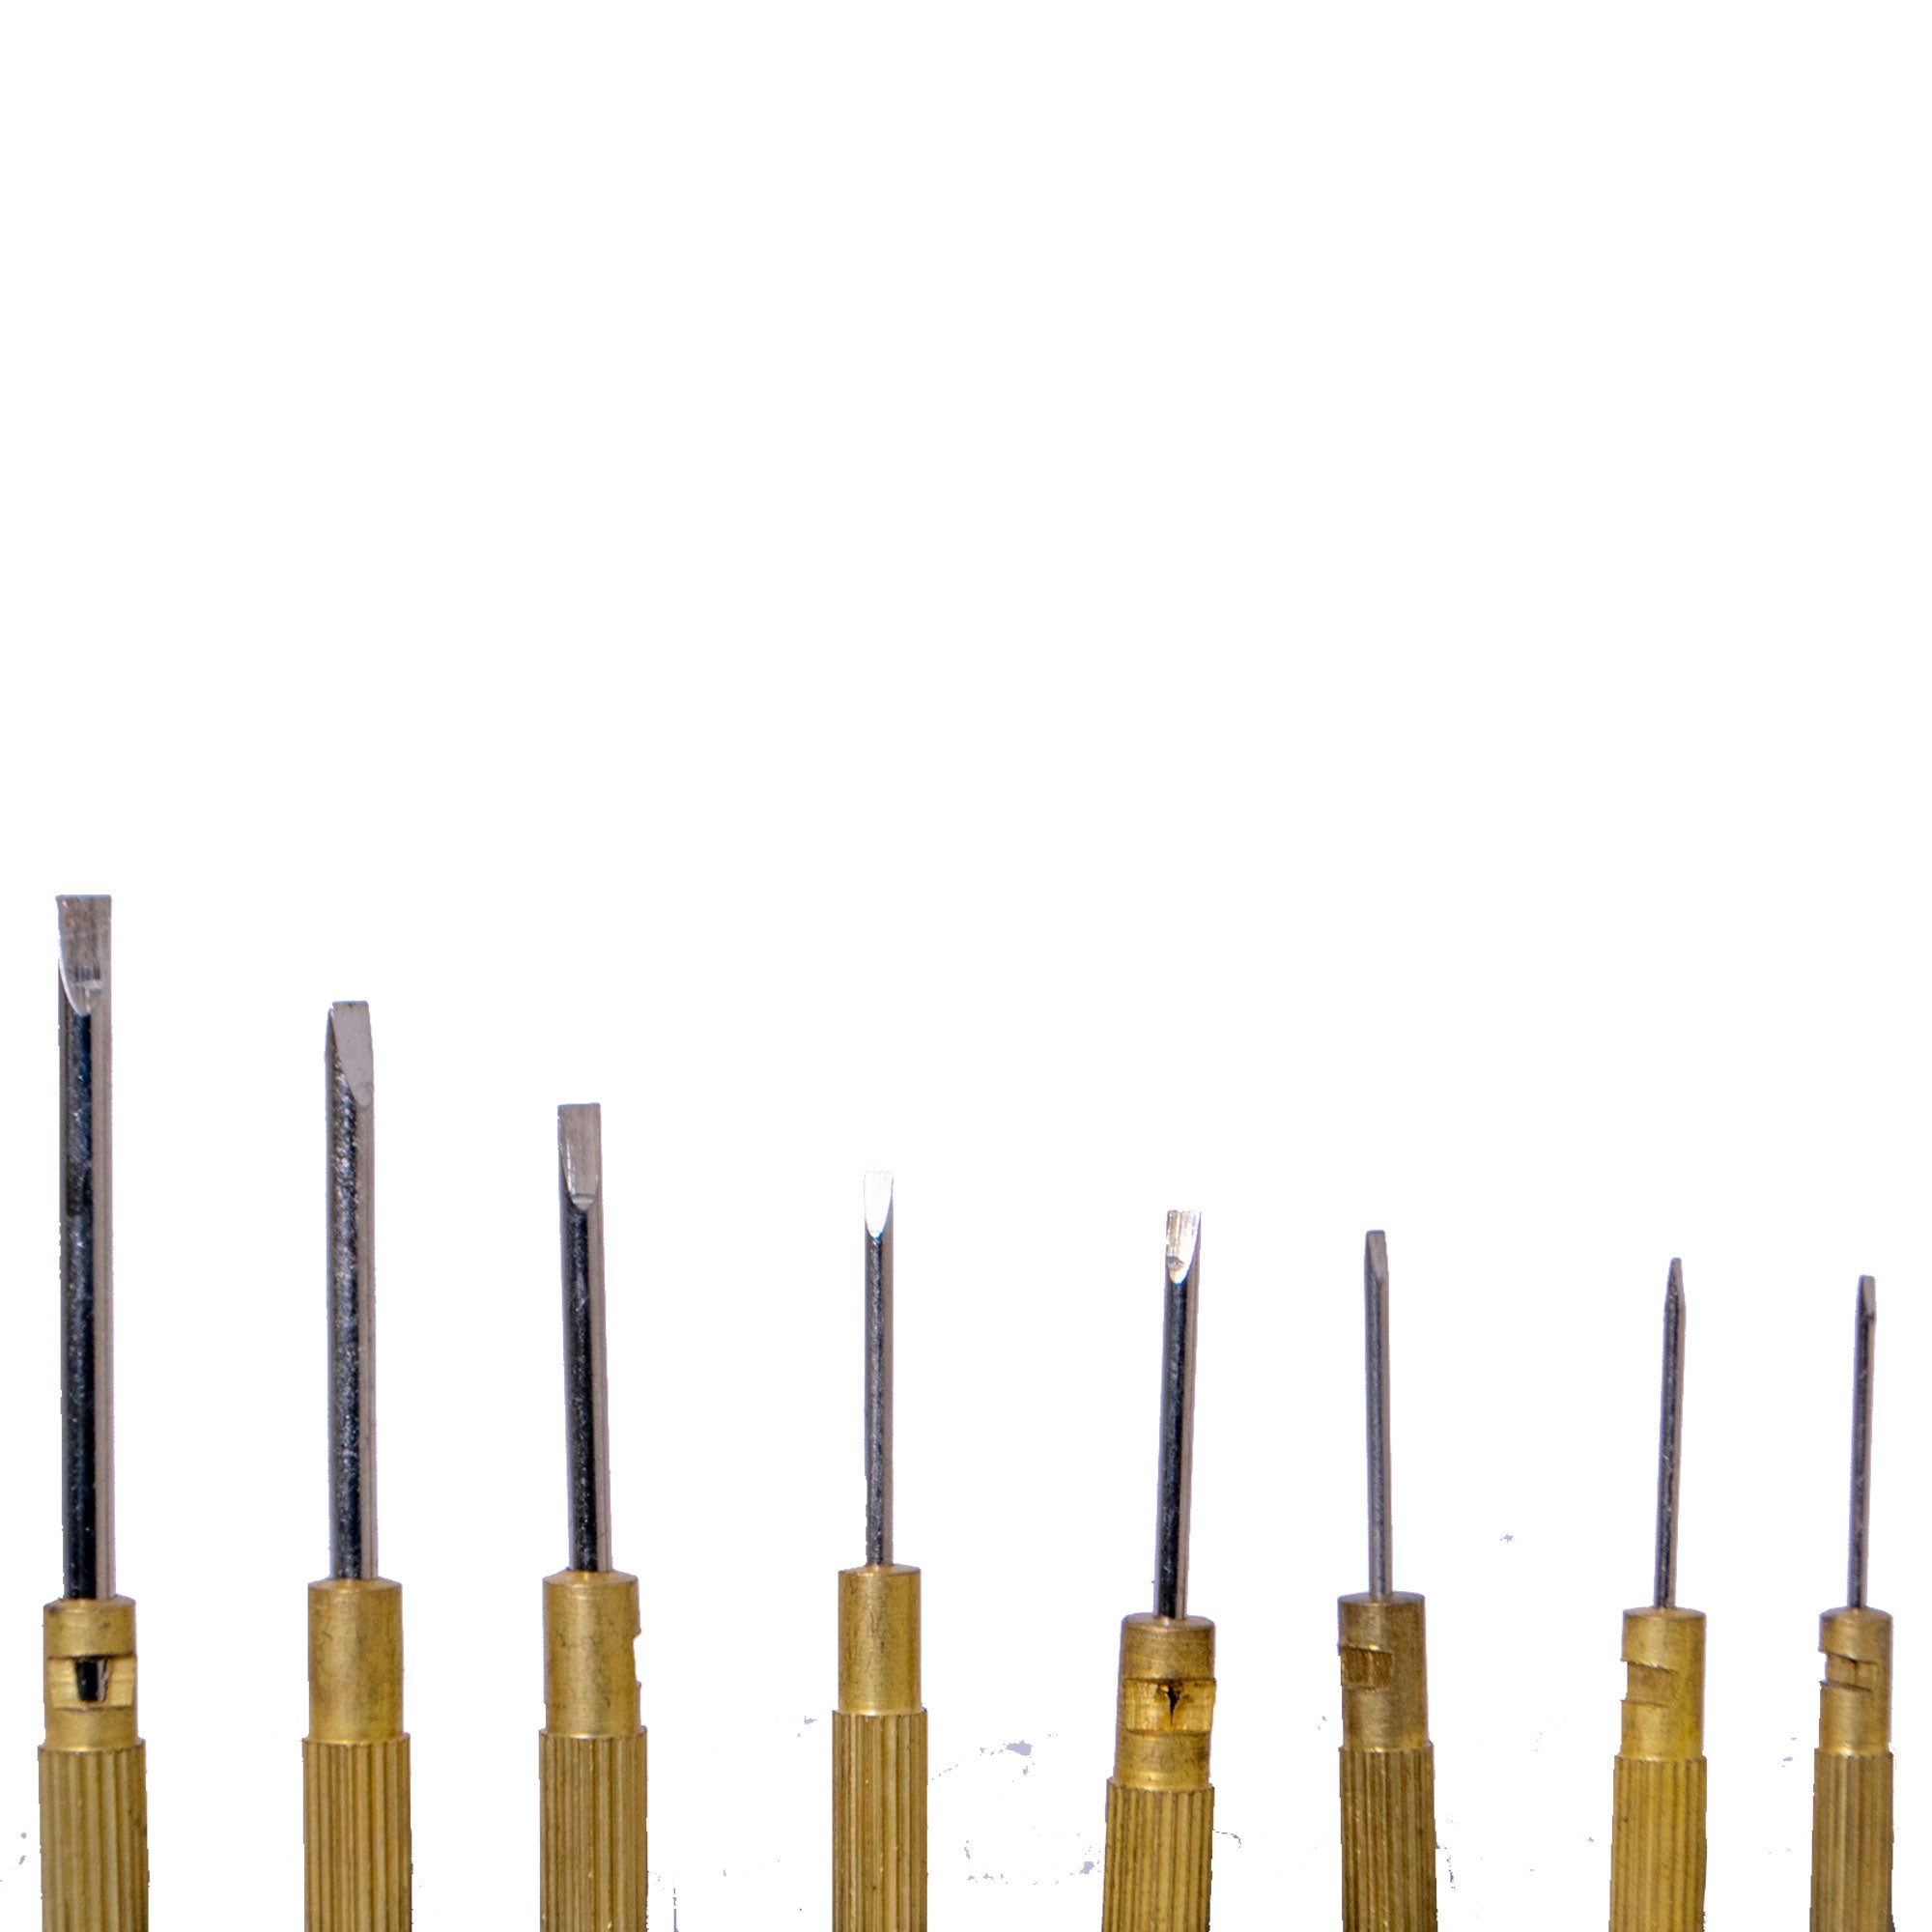 Set of 9 screwdrivers in pouch, 0.6mm to 2.3mm